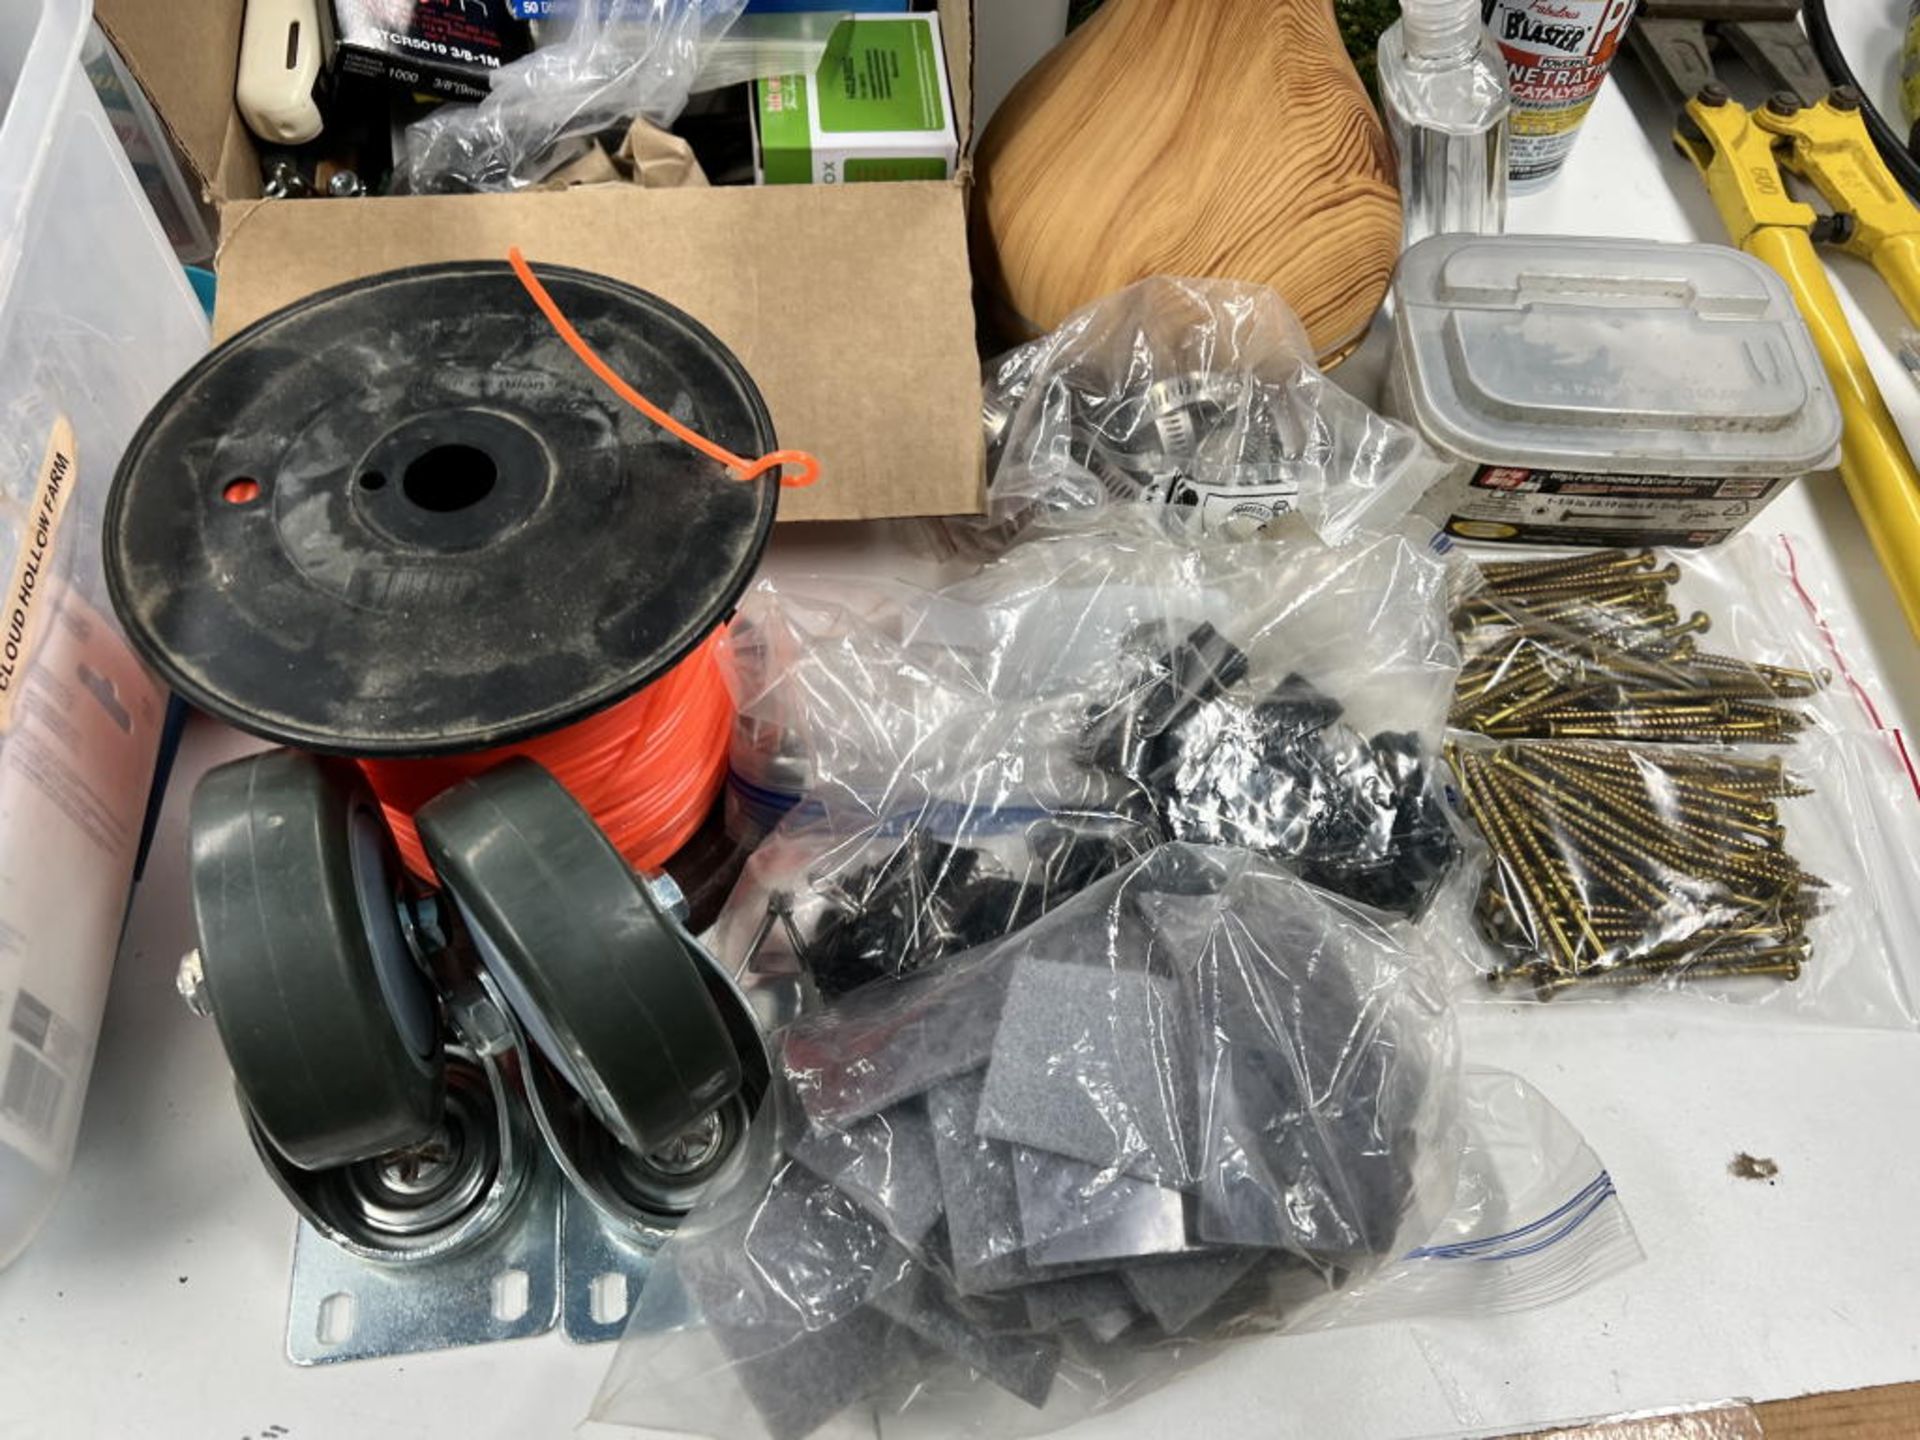 MISCELLANEOUS LOT: PLASTIC BAGS, COOLER BAG, CASTERS, PIPE CLAMPS, TAPE, VELCRO, SCREWS, PAPER TOWEL - Image 5 of 6